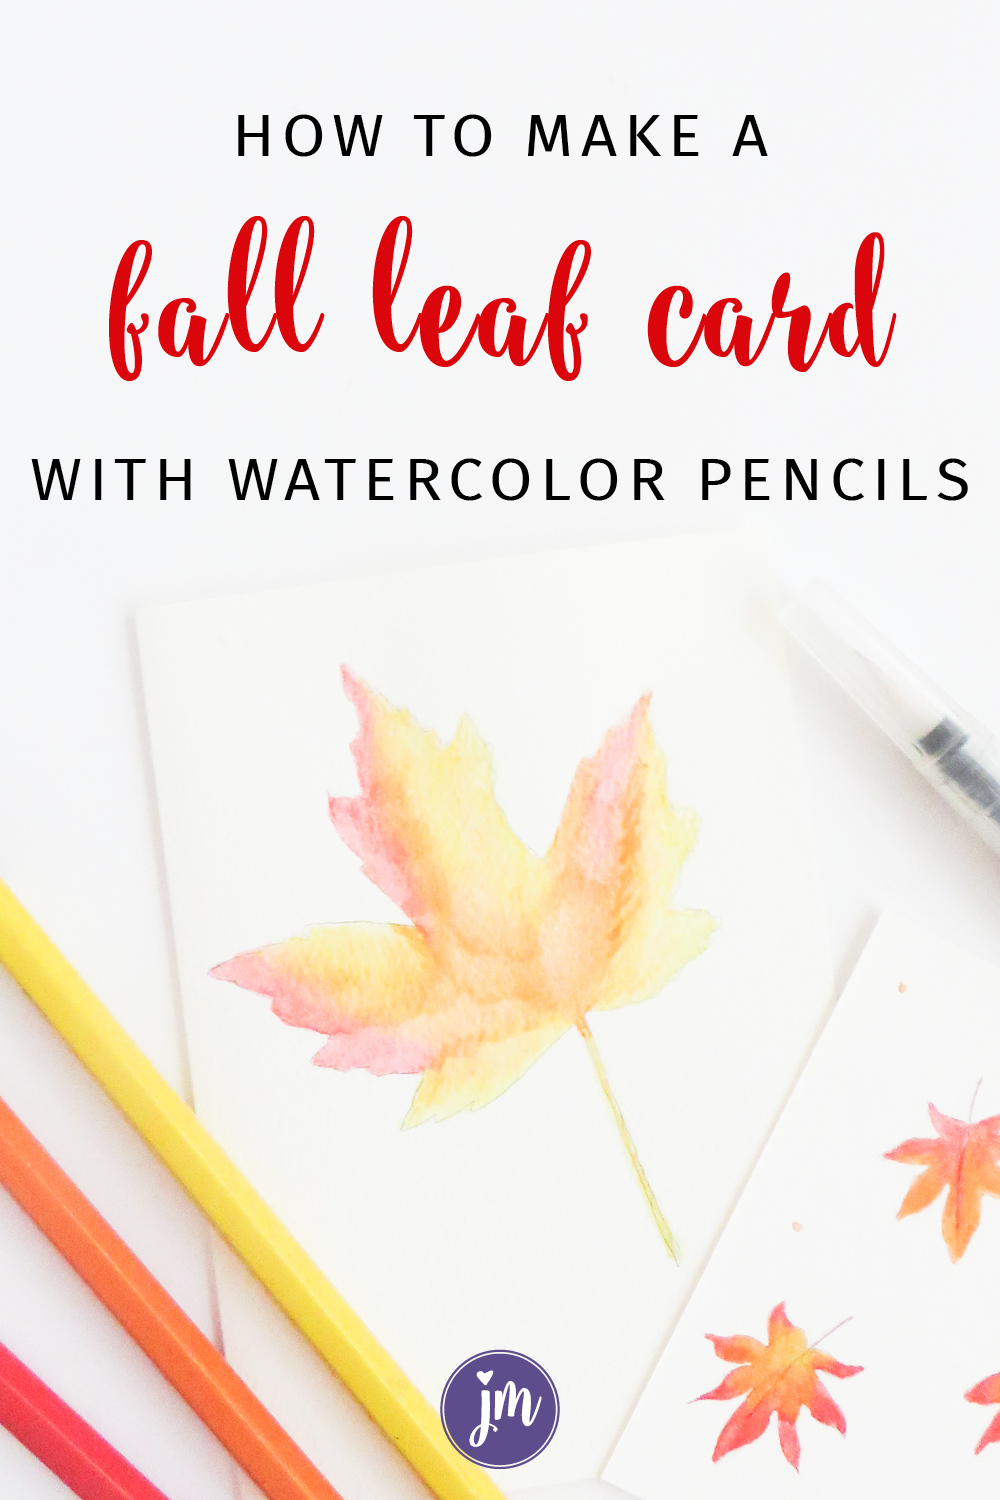 Learn how to make this pretty fall watercolor leaf card! It's sooo simple and will make your friend's day too! #snailmail #cardmaking